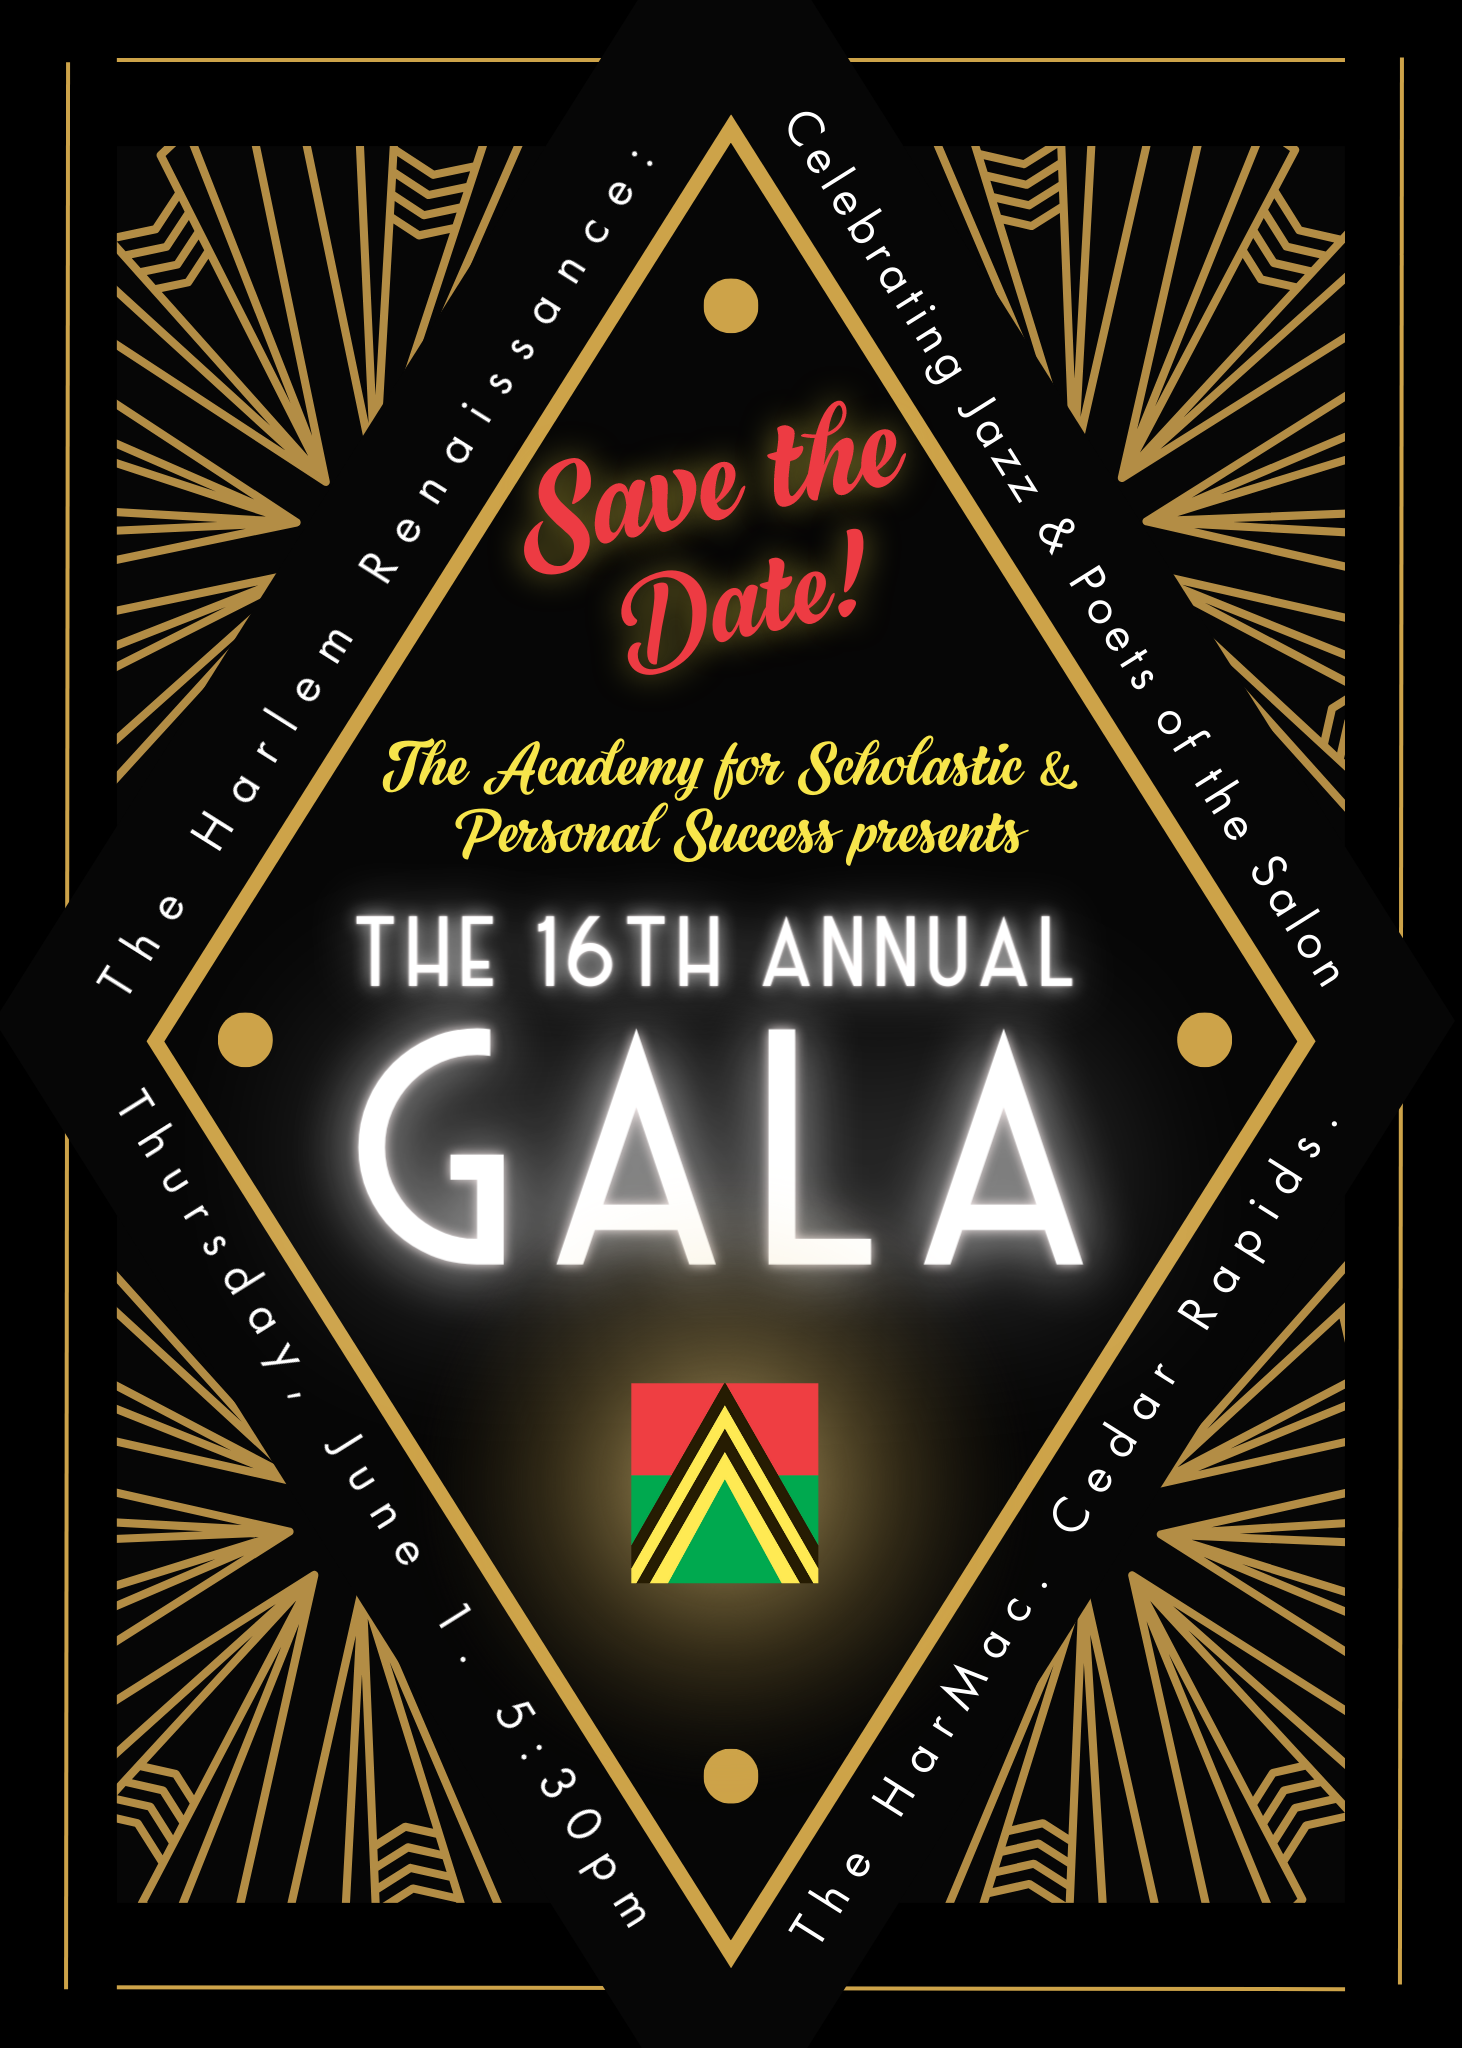 The Academy SPS 16th Annual Gala Save the Date. Gala is on June 1st at 5:30pm.